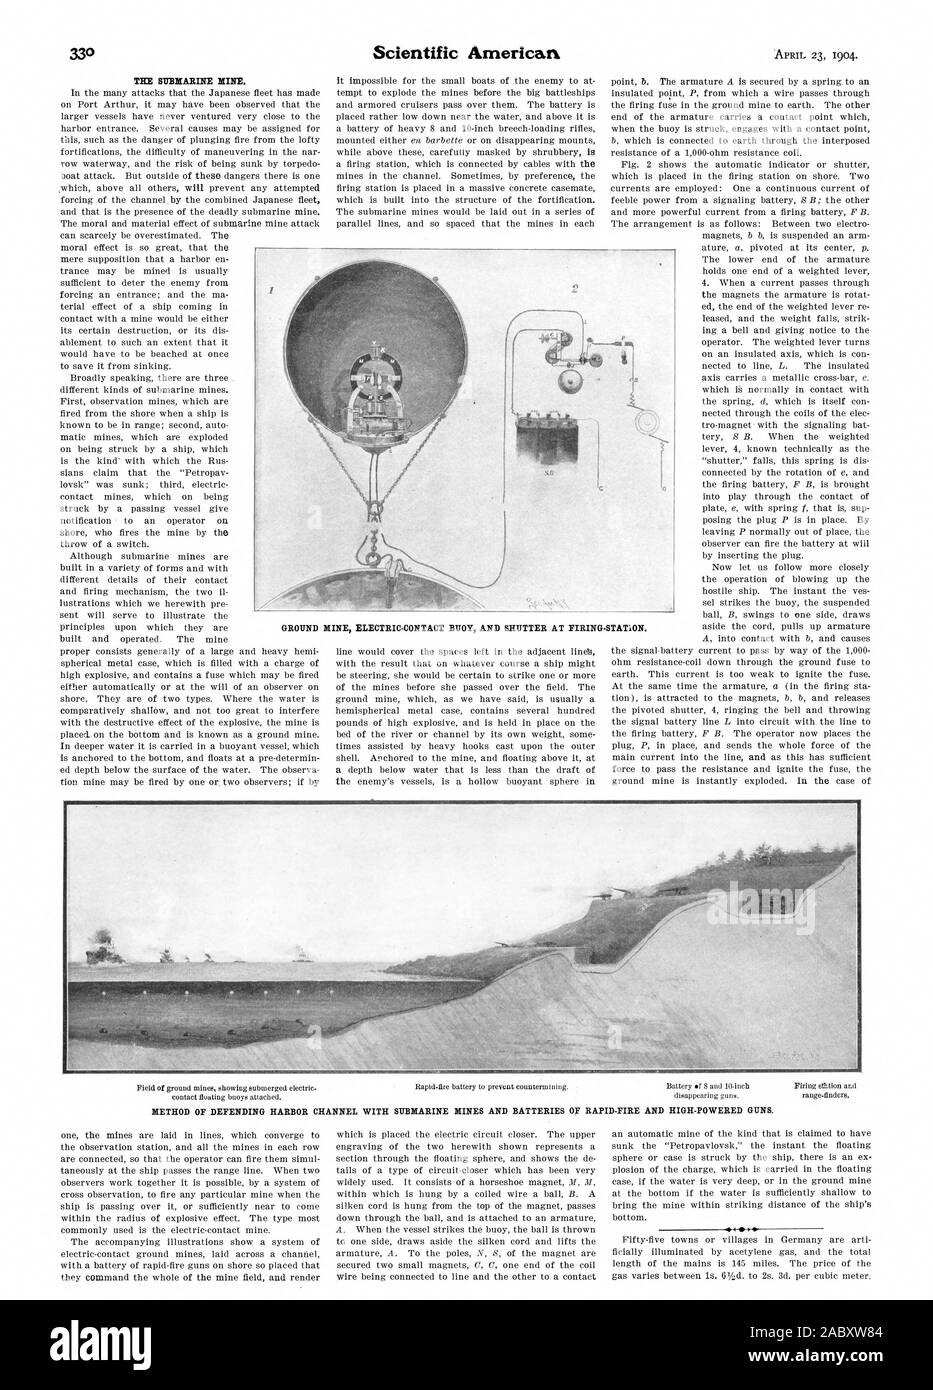 THE SUBMARINE MINE. METHOD OF DEFENDING HARBOR CHANNEL WITH SUBMARINE MINES AND BATTERIES OF RAPID-FIRE AND HIGH-POWERED GUNS., scientific american, 1904-04-23 Stock Photo